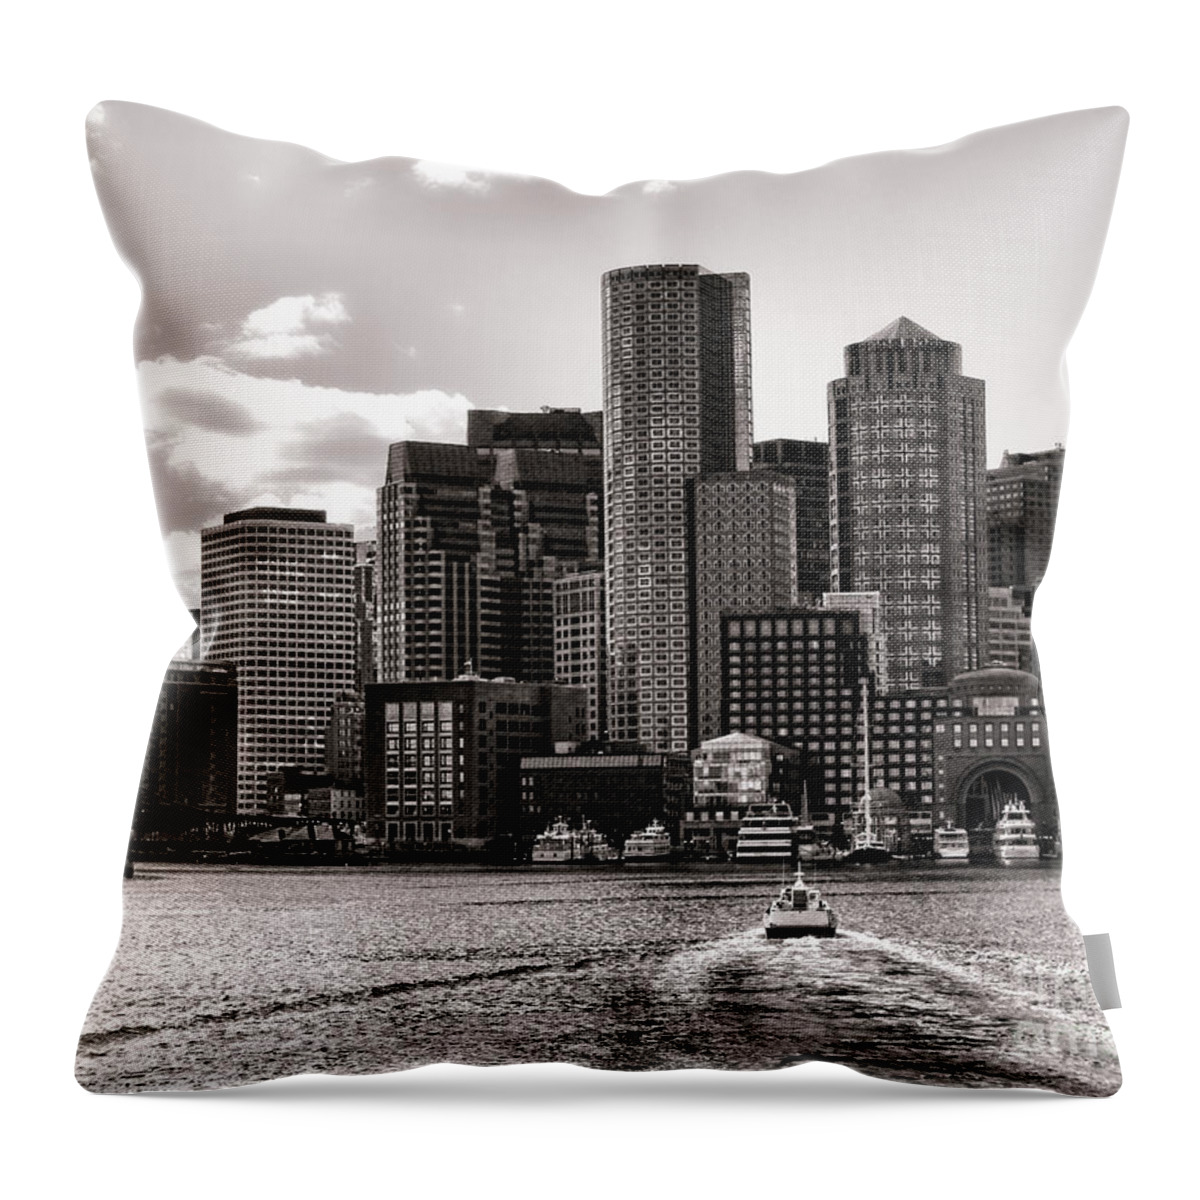 Boston Throw Pillow featuring the photograph Boston by Olivier Le Queinec